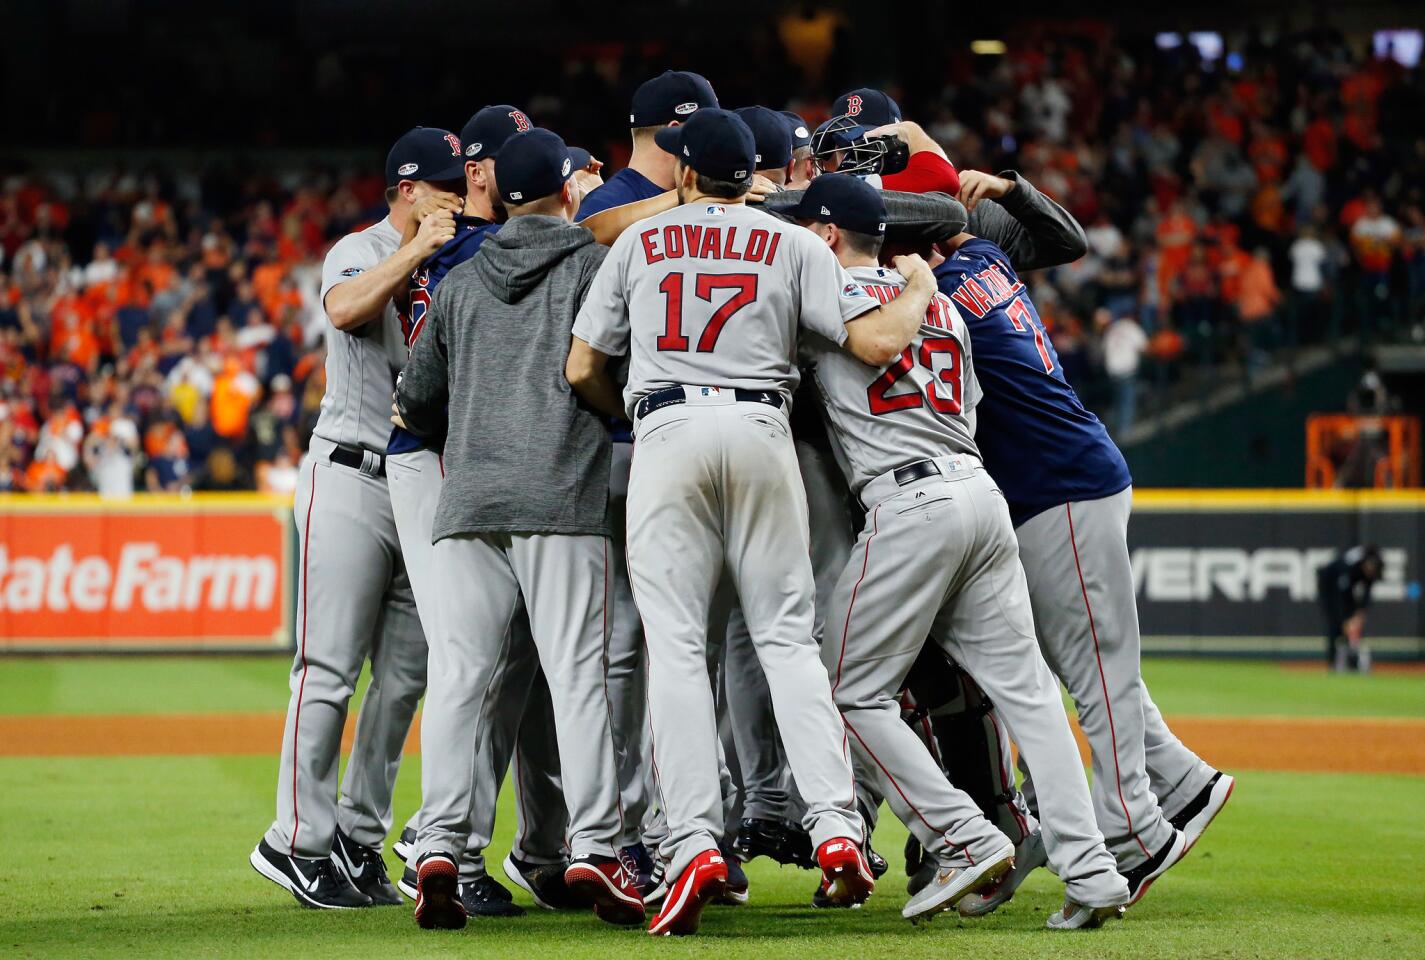 HOUSTON, TX - OCTOBER 18: The Boston Red Sox celebrate defeating the Houston Astros 4-1 in Game Five of the American League Championship Series to advance to the 2018 World Series at Minute Maid Park on October 18, 2018 in Houston, Texas. (Photo by Bob Levey/Getty Images) ** OUTS - ELSENT, FPG, CM - OUTS * NM, PH, VA if sourced by CT, LA or MoD **